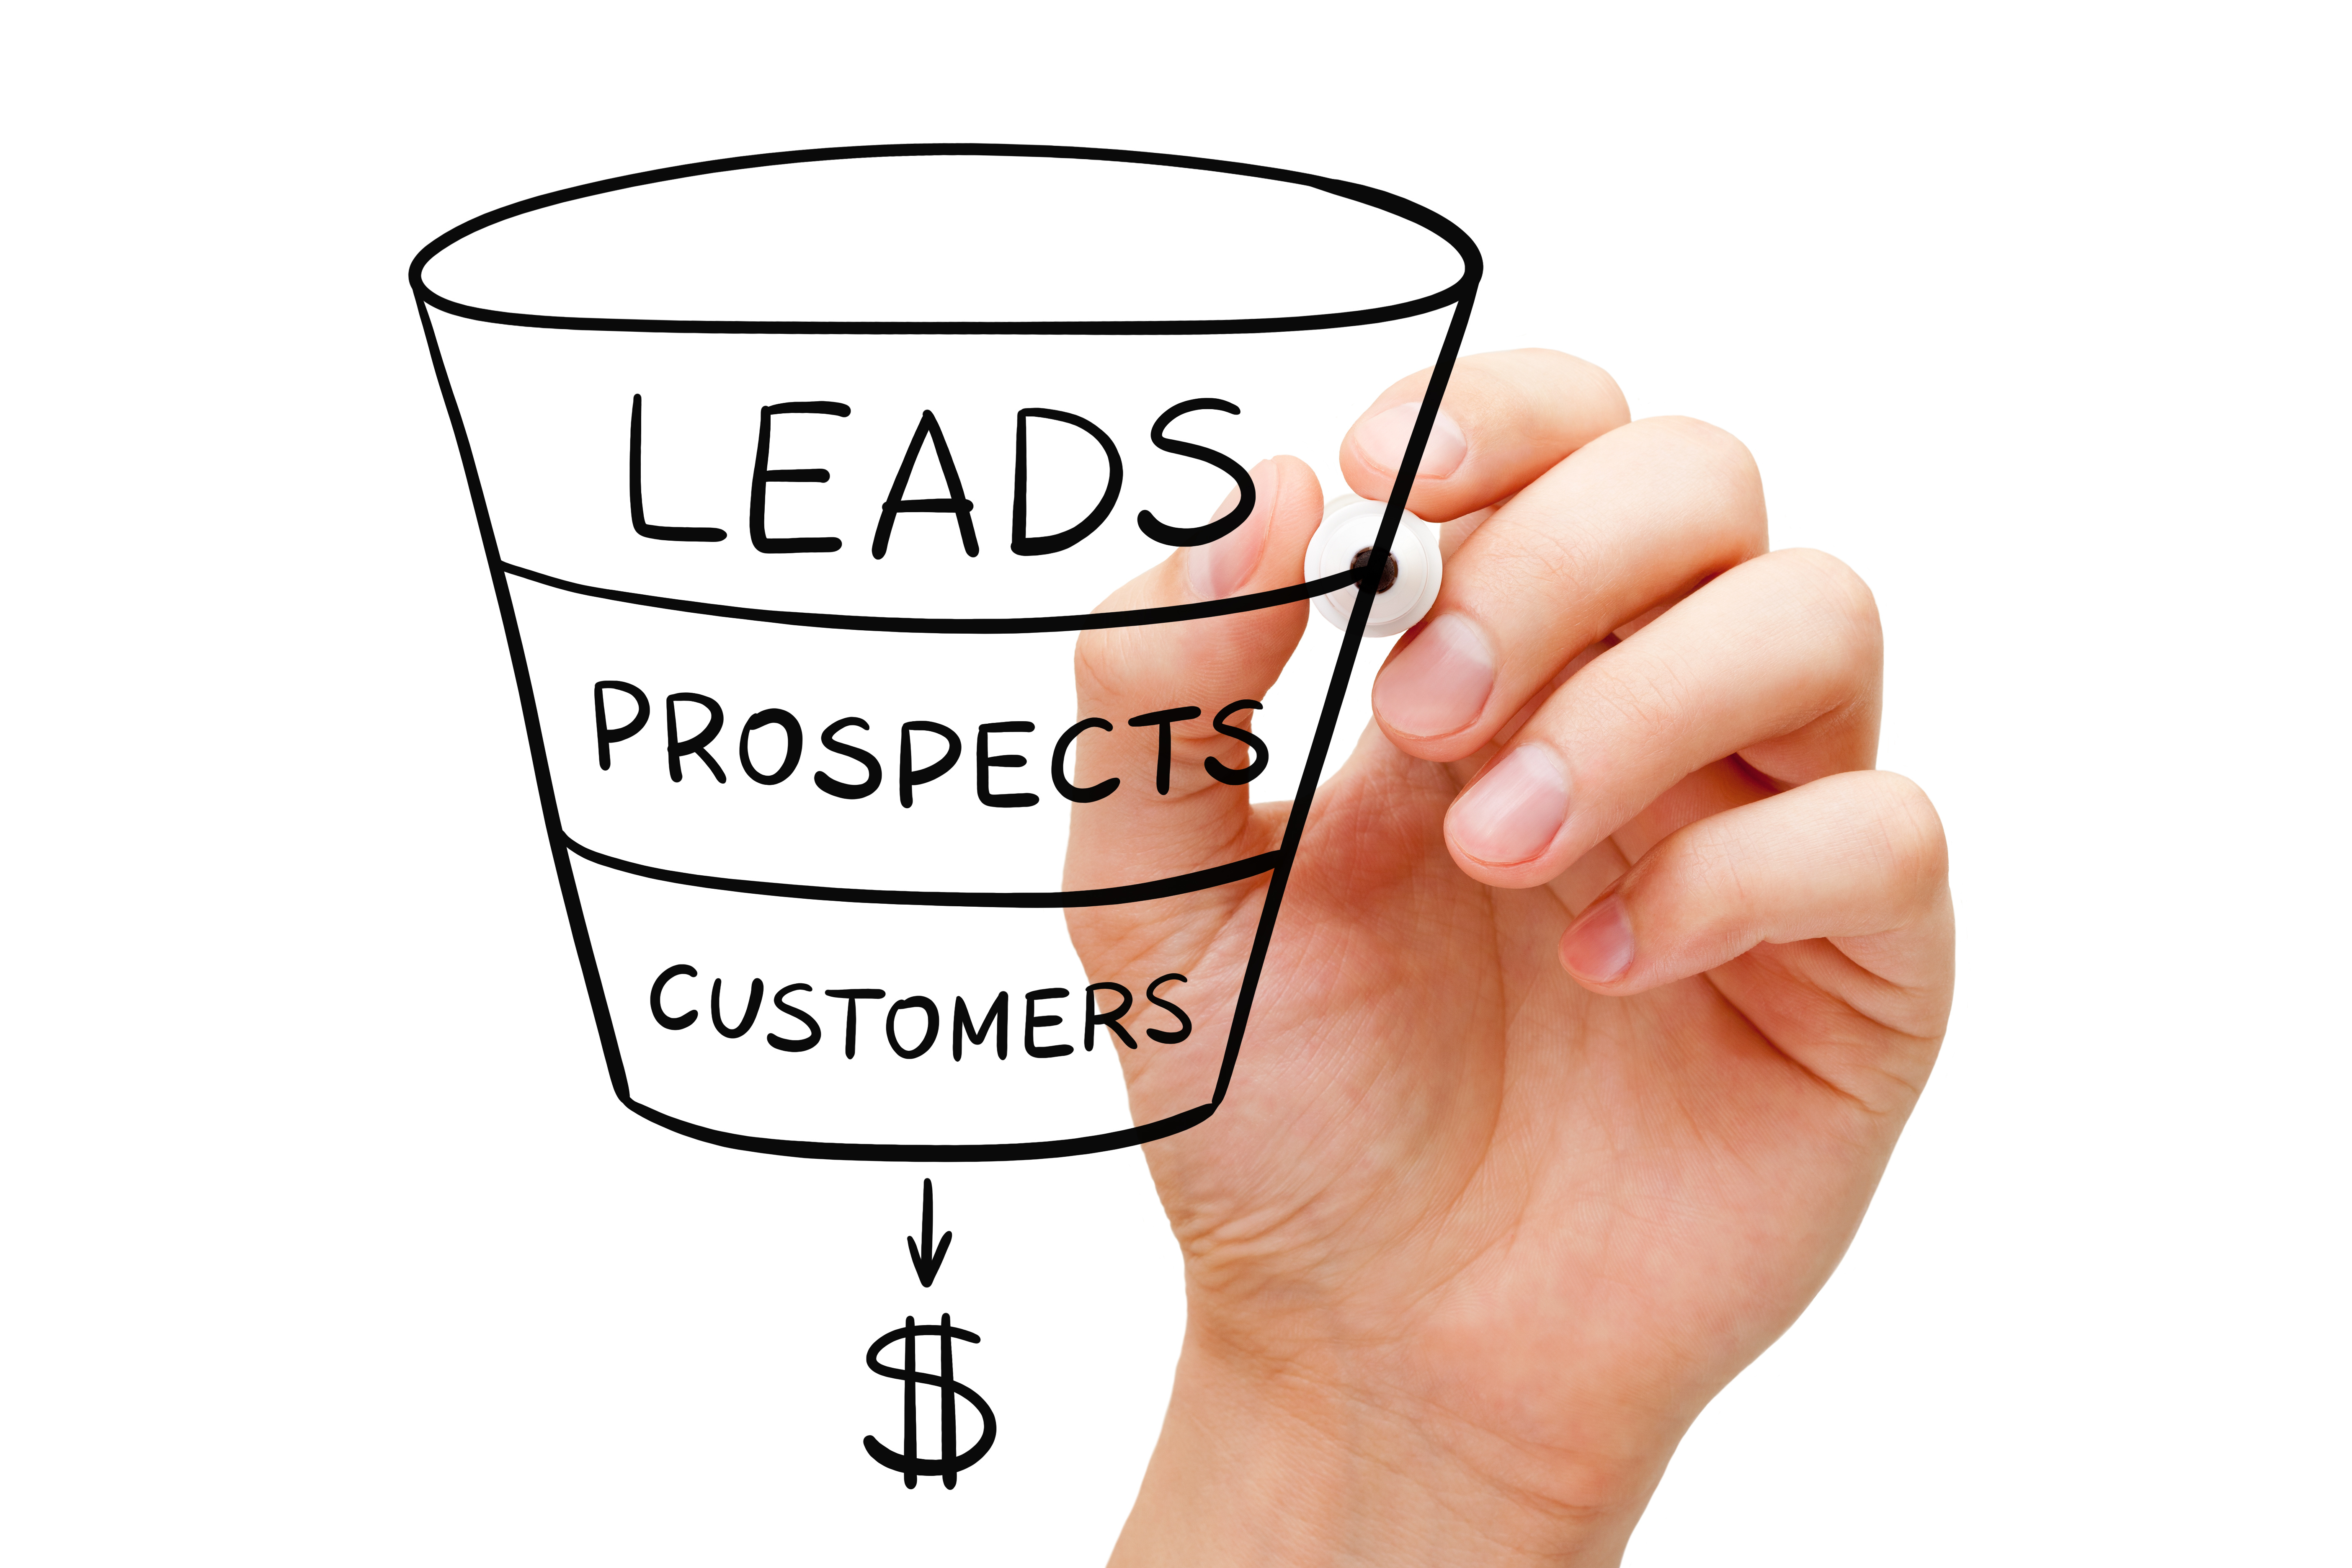 Sales funnel showing how aligned sales and marketing teams can generate better leads